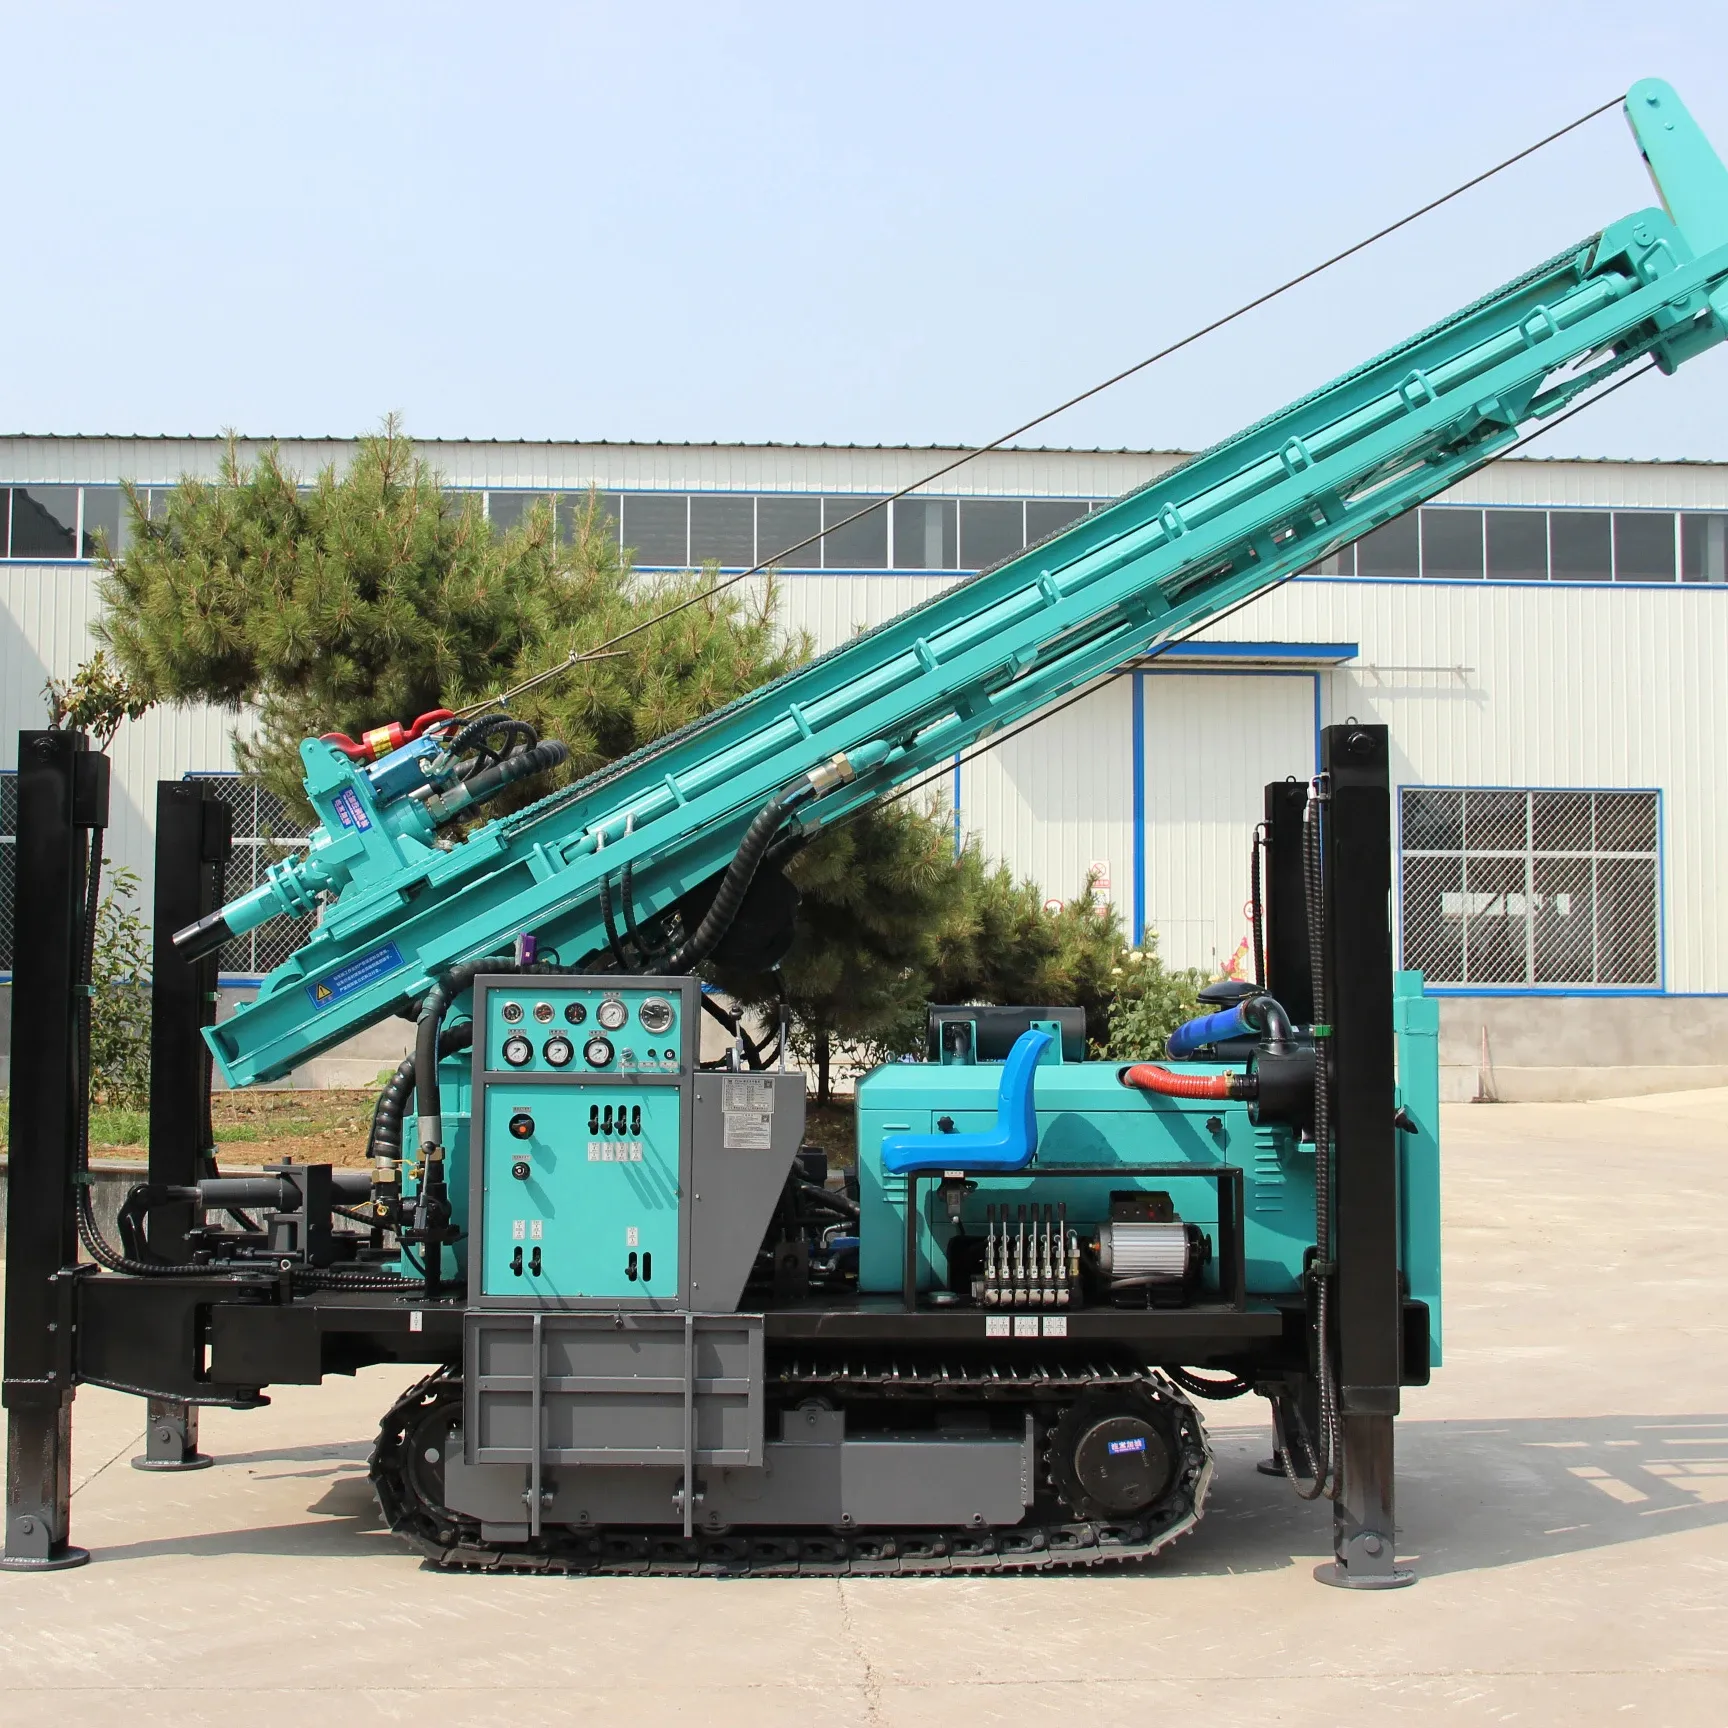 KAISHAN New KW180 Crawler Hydraulic Well Rig Drilling Machine For Water Wells